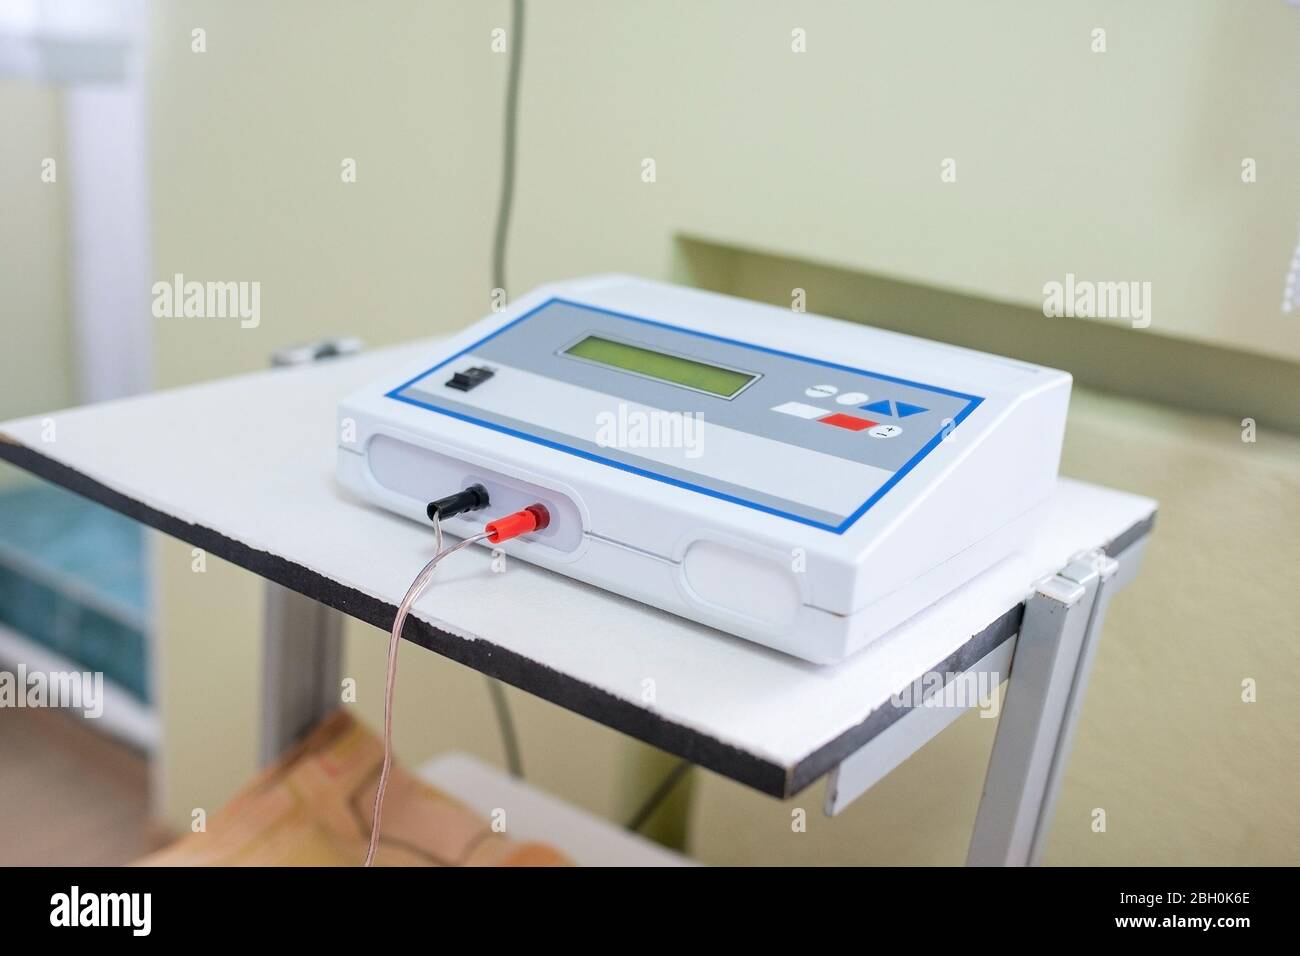 Apparatus for electrotherapy in the office. Stock Photo